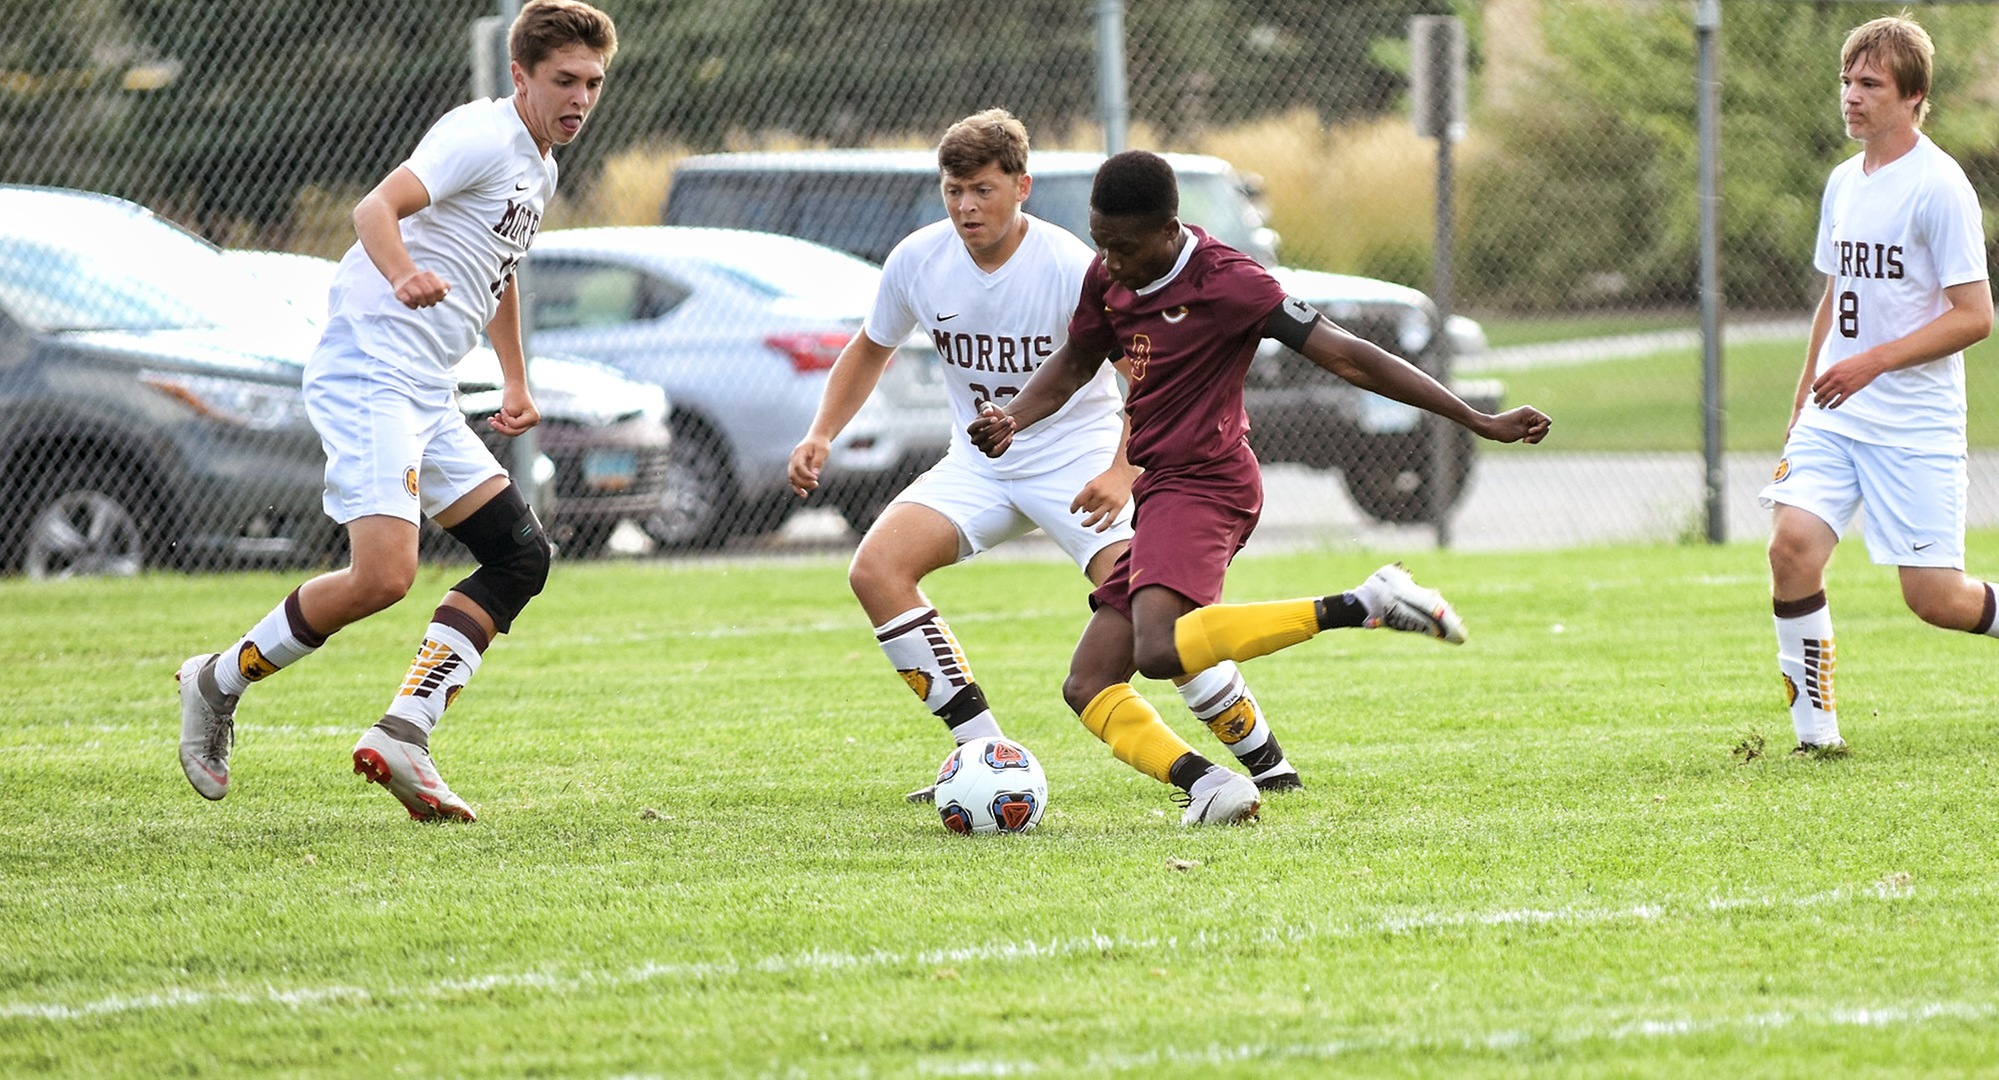 Senior Aronah Mukhtar is surrounded by three Minn.-Morris defenders as he tries to take a shot on goal. Mukhtar had a goal and an assist in the Cobbers' 4-1 win.